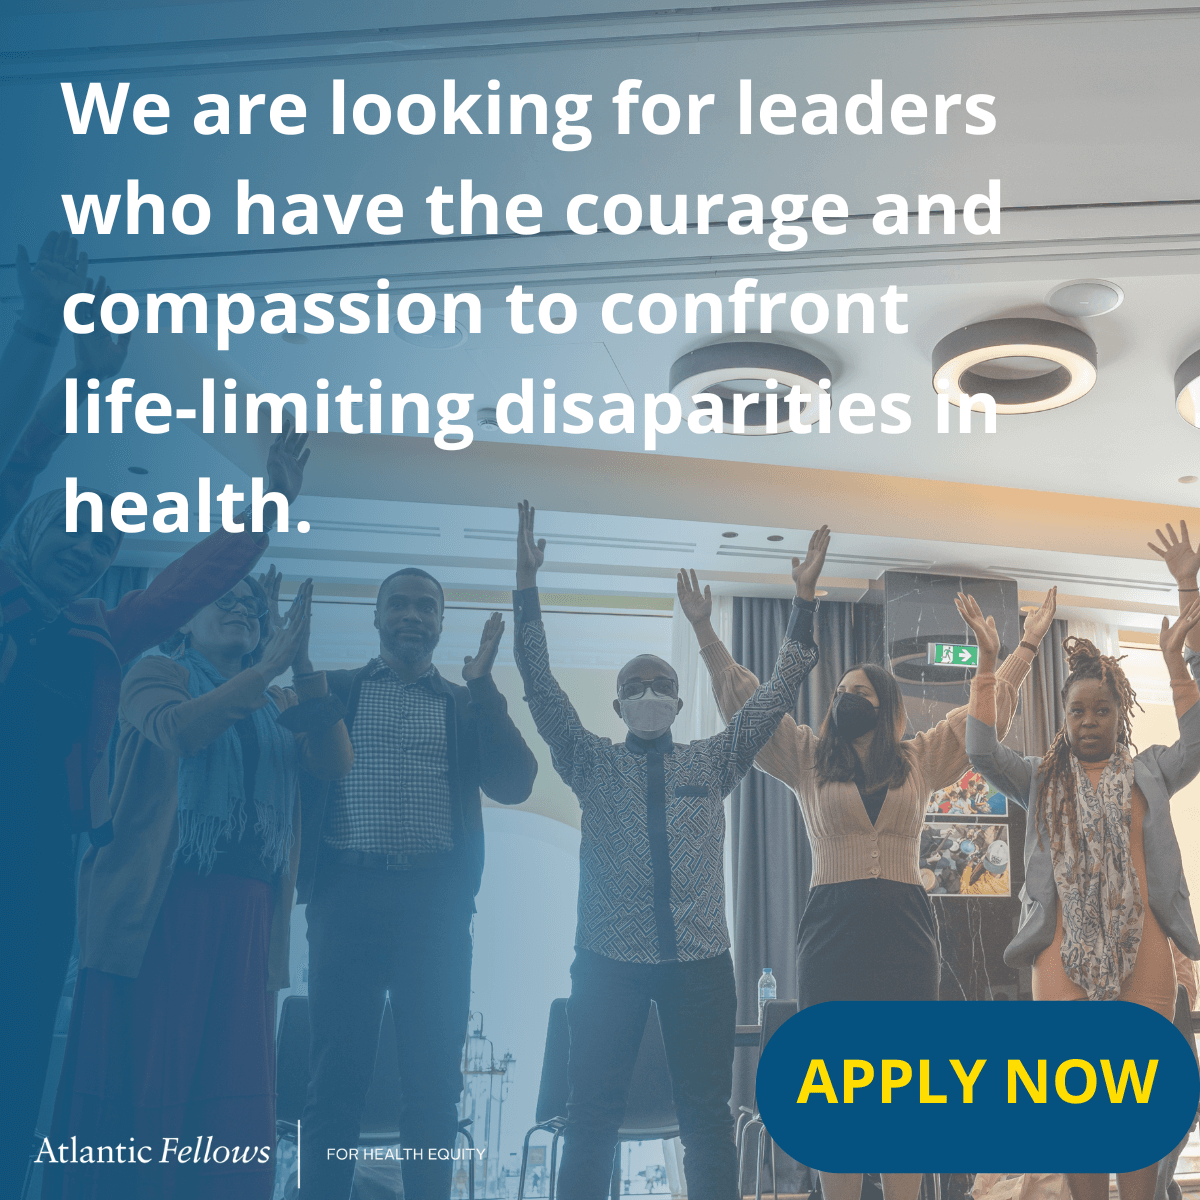 We are looking for leaders who have the courage and compassion to confront life-limiting disparities in health.